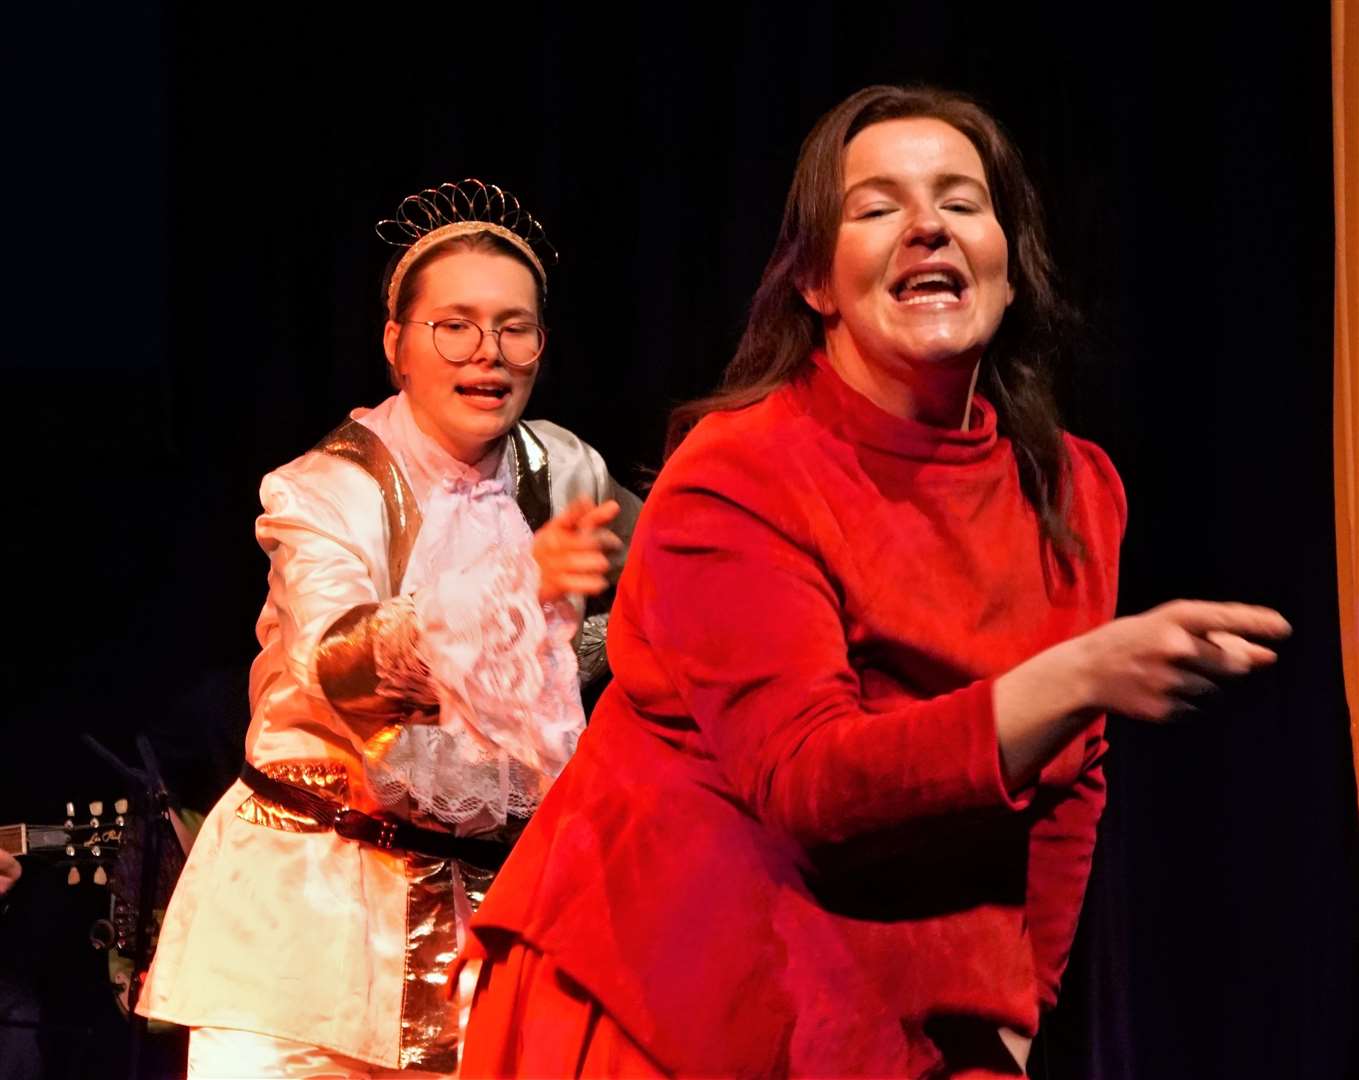 Thurso Players production includes song and dance that will delight audiences. Picture: DGS